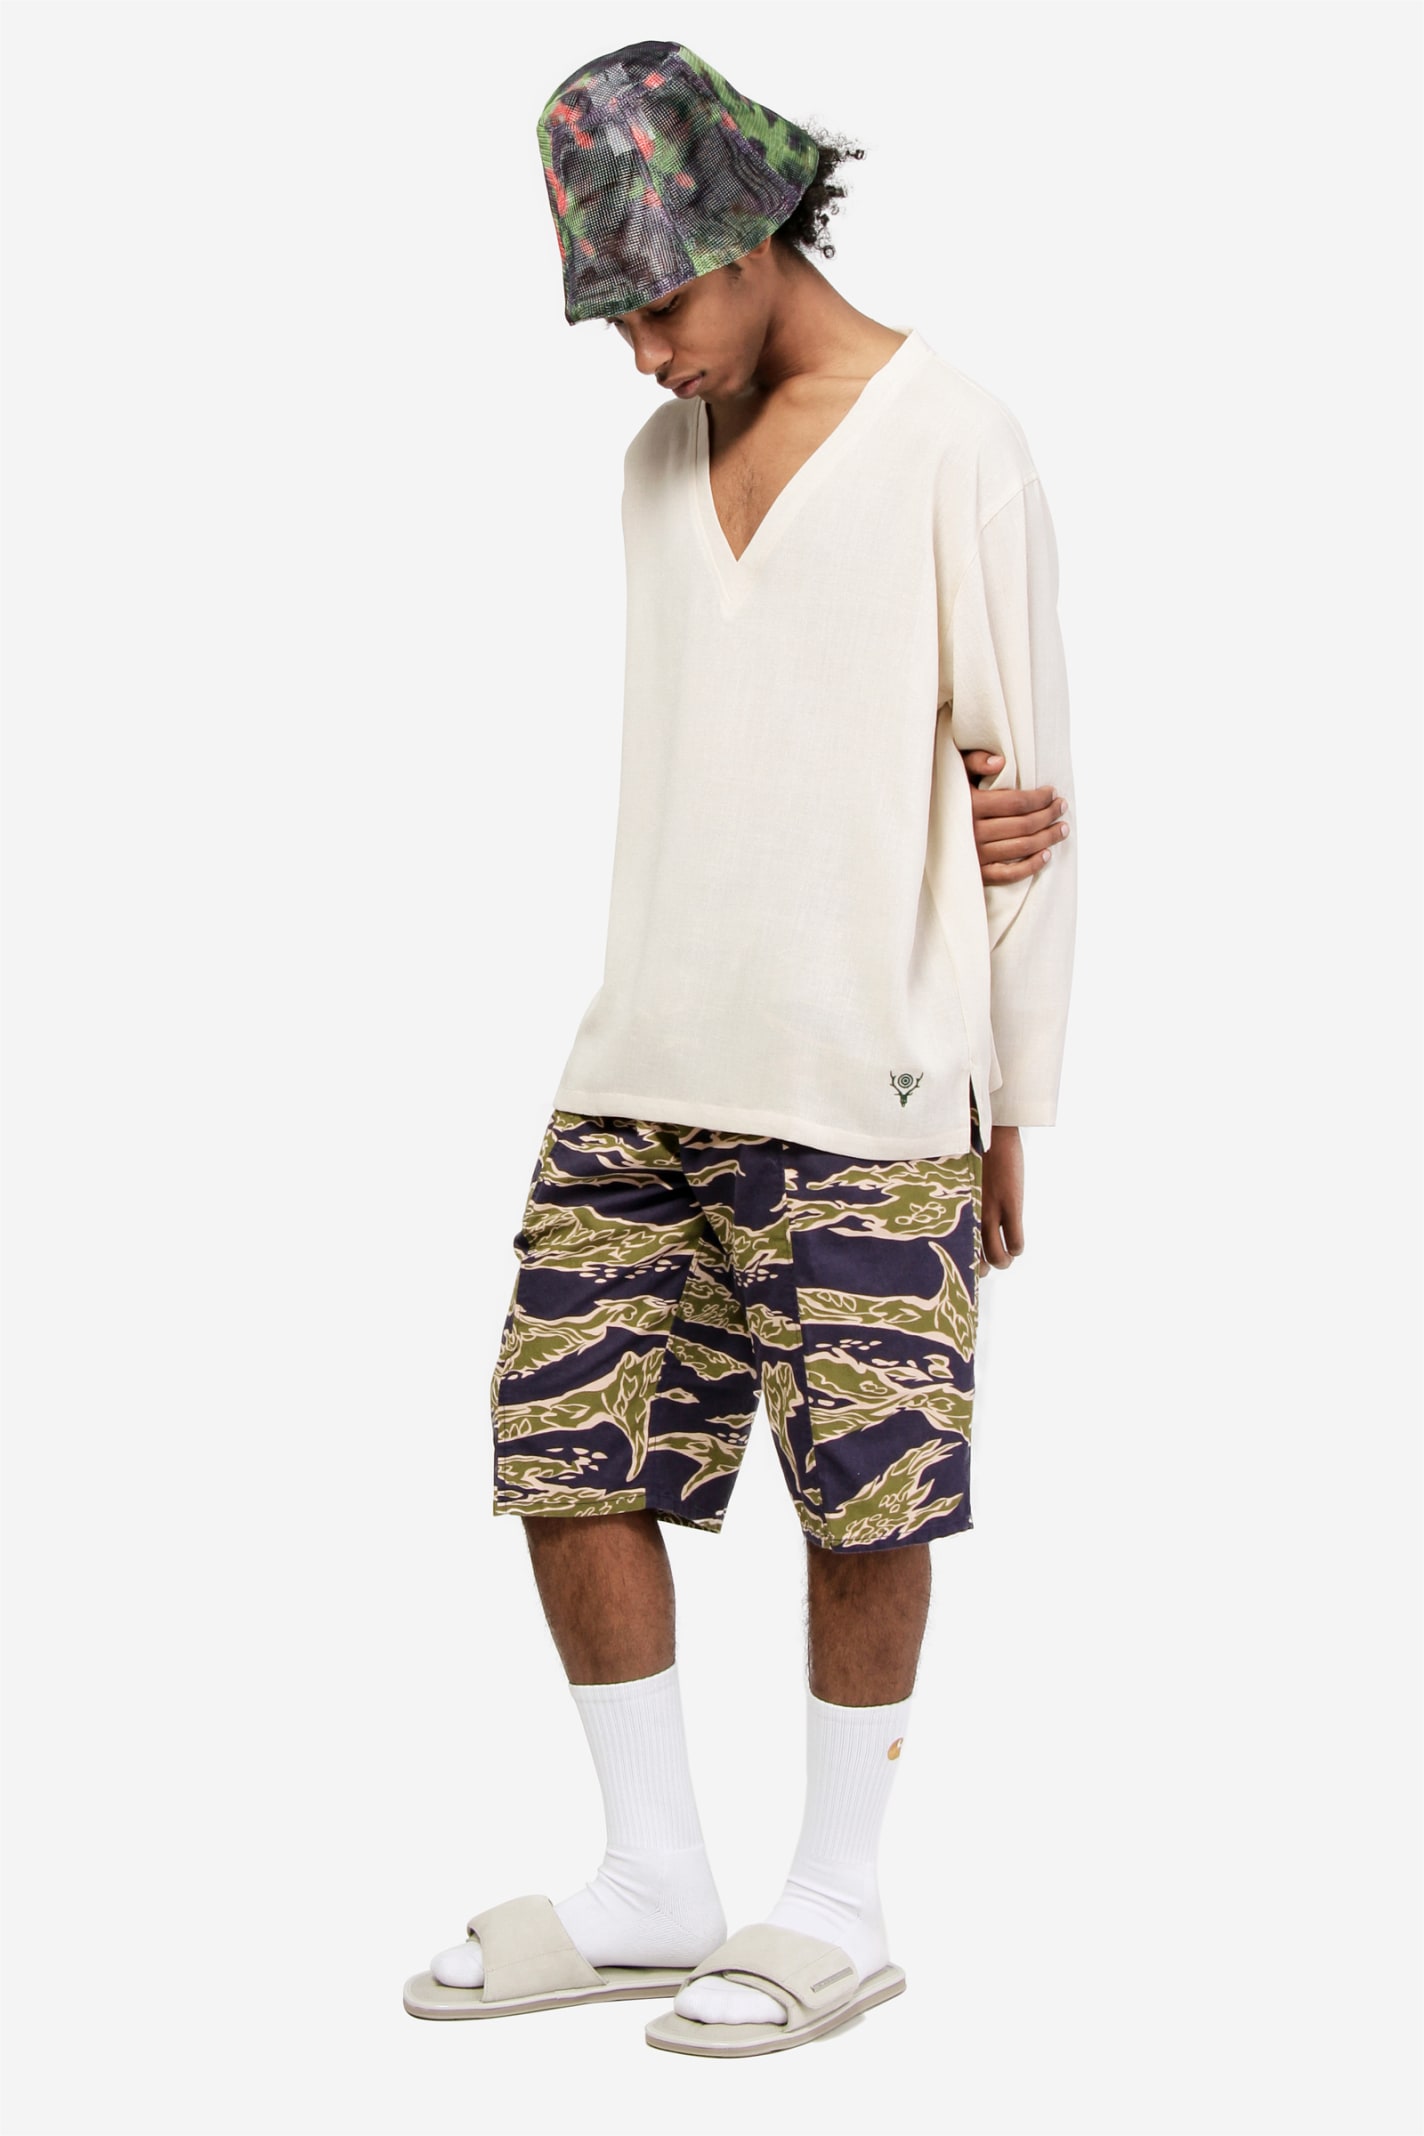 South2 West8 Army String Shorts